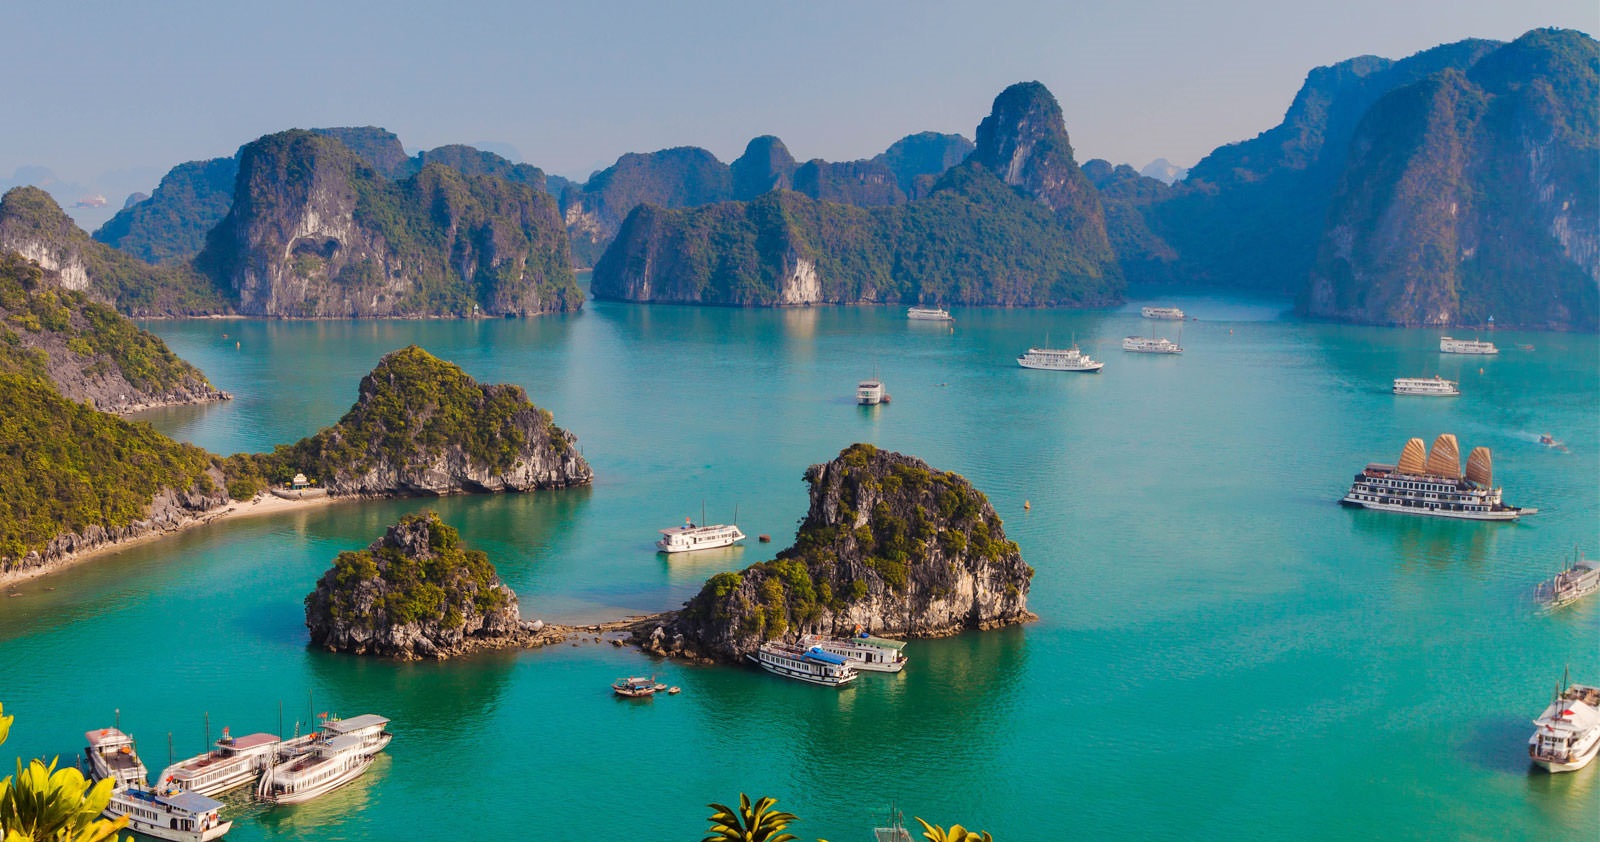 How much is Halong Bay cruise?